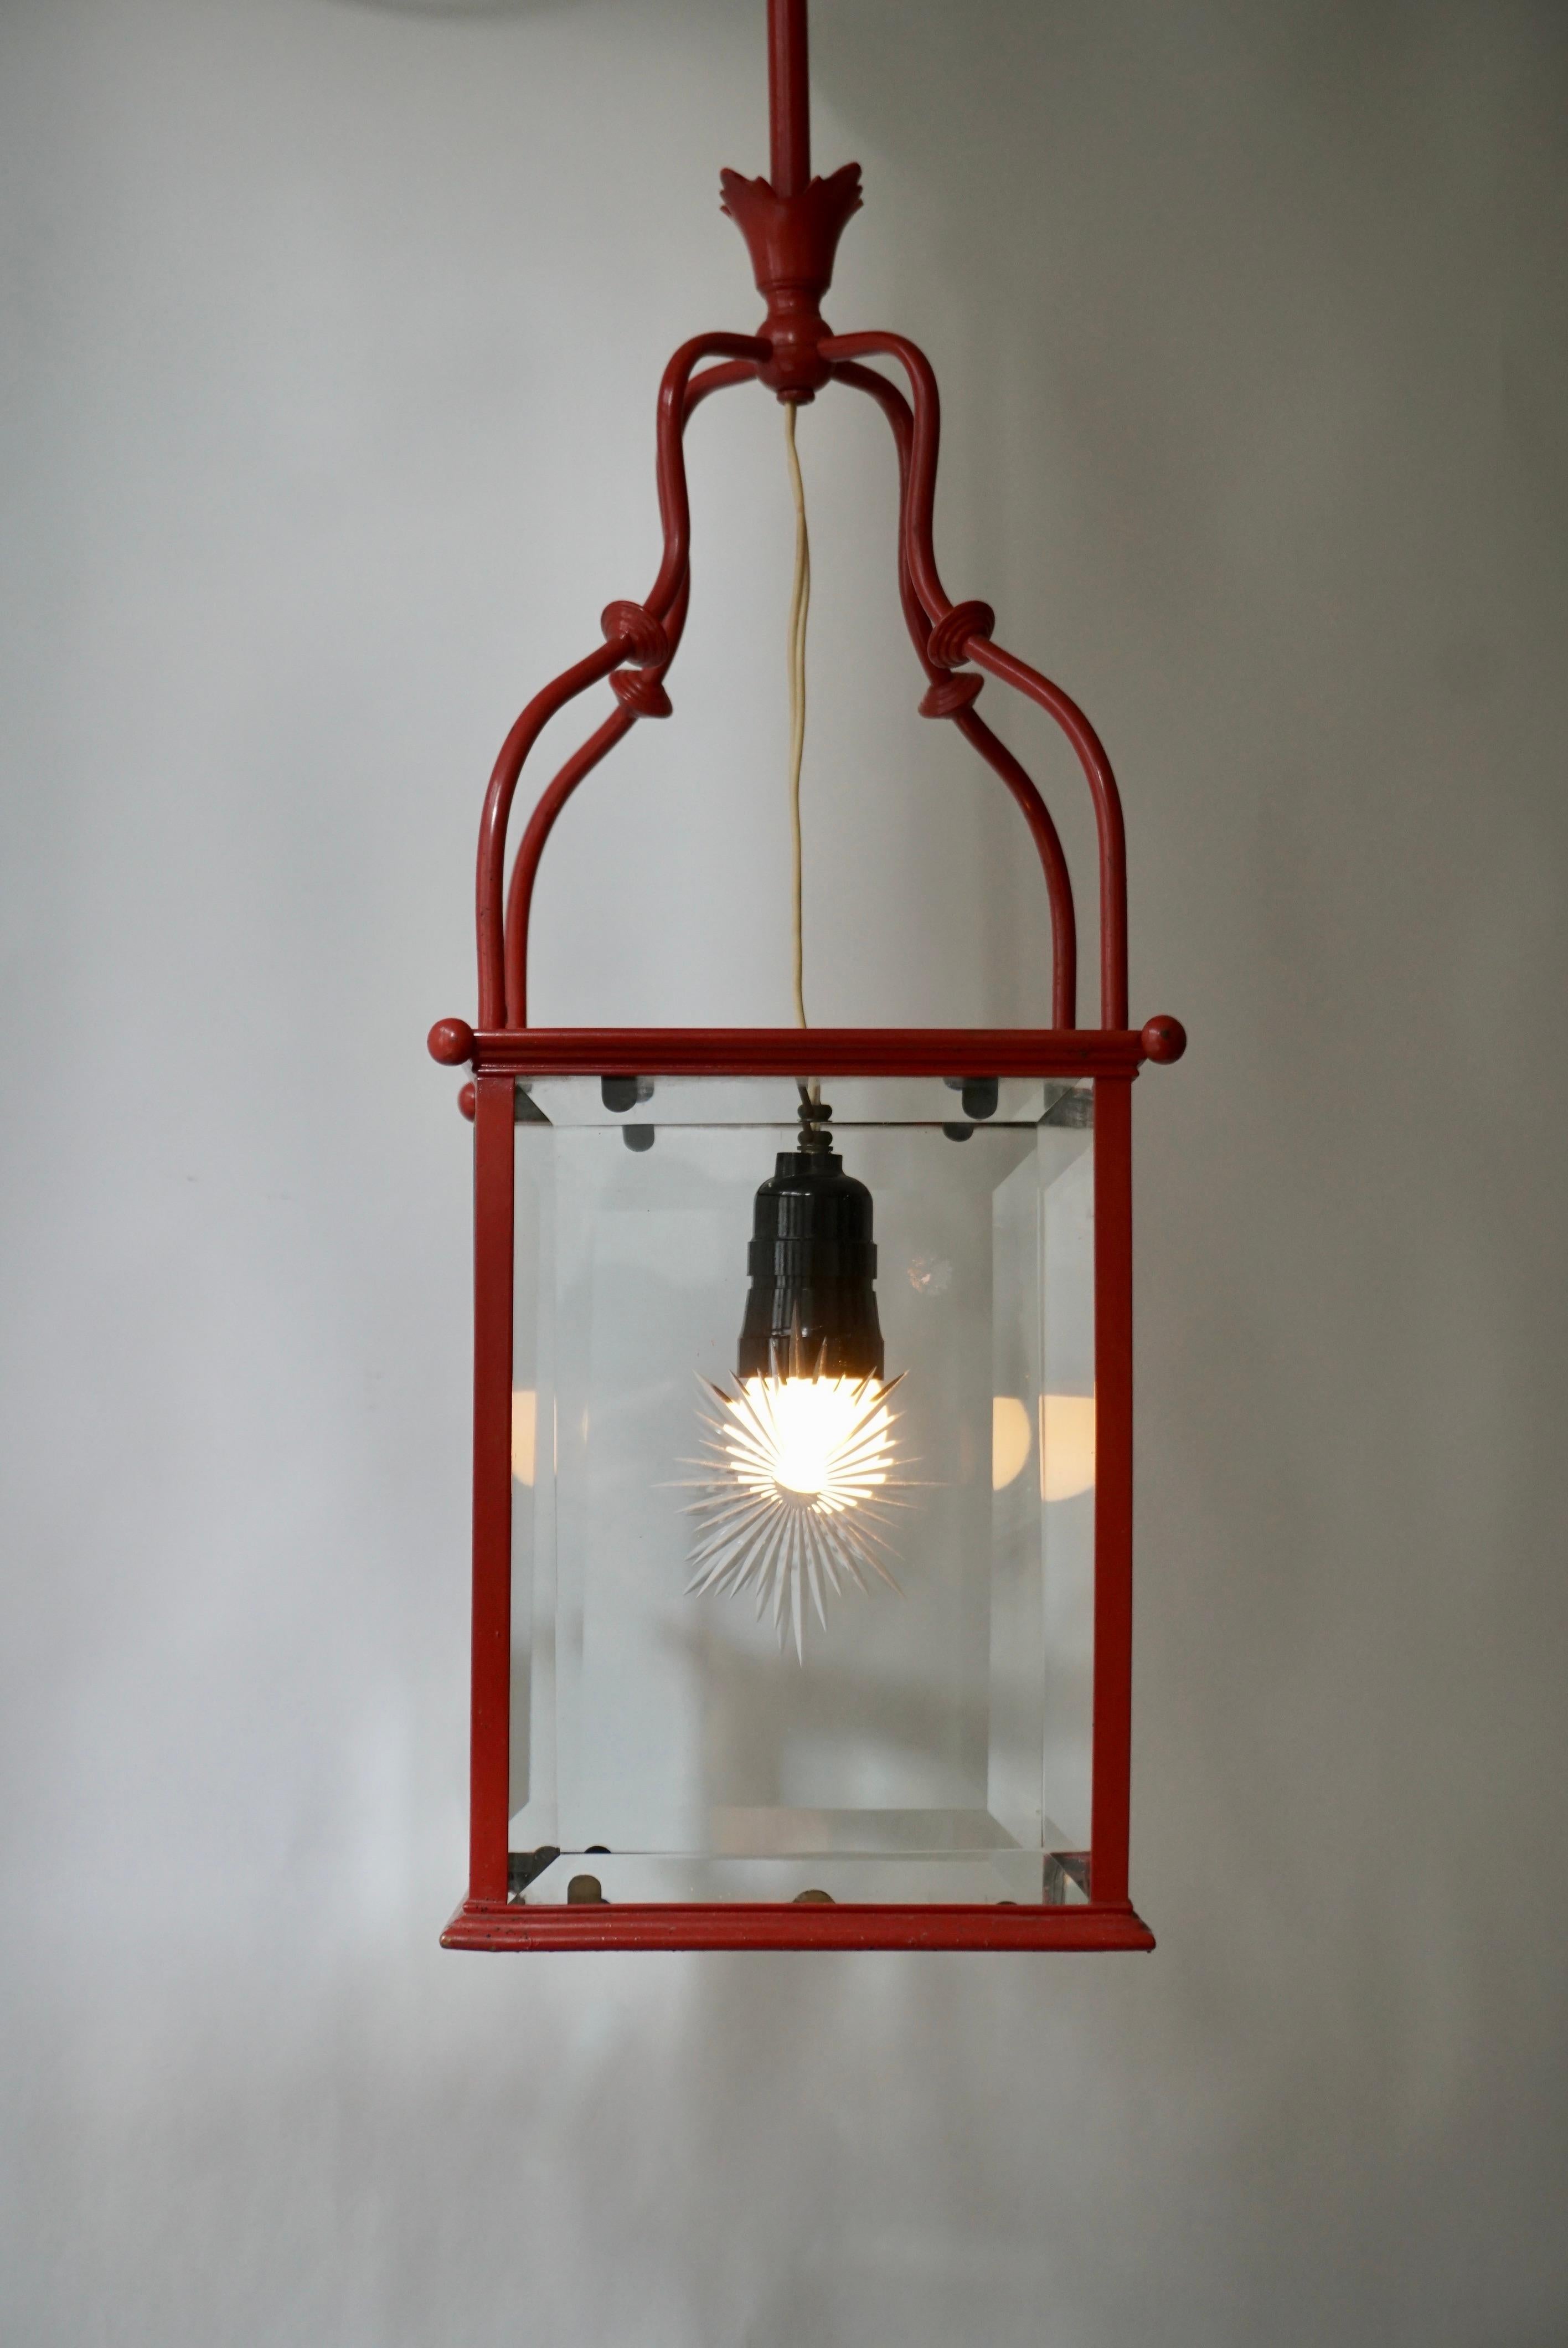 An Italian Red Tole Metal Lantern with Cut Glass, Early 20th C. For Sale 8